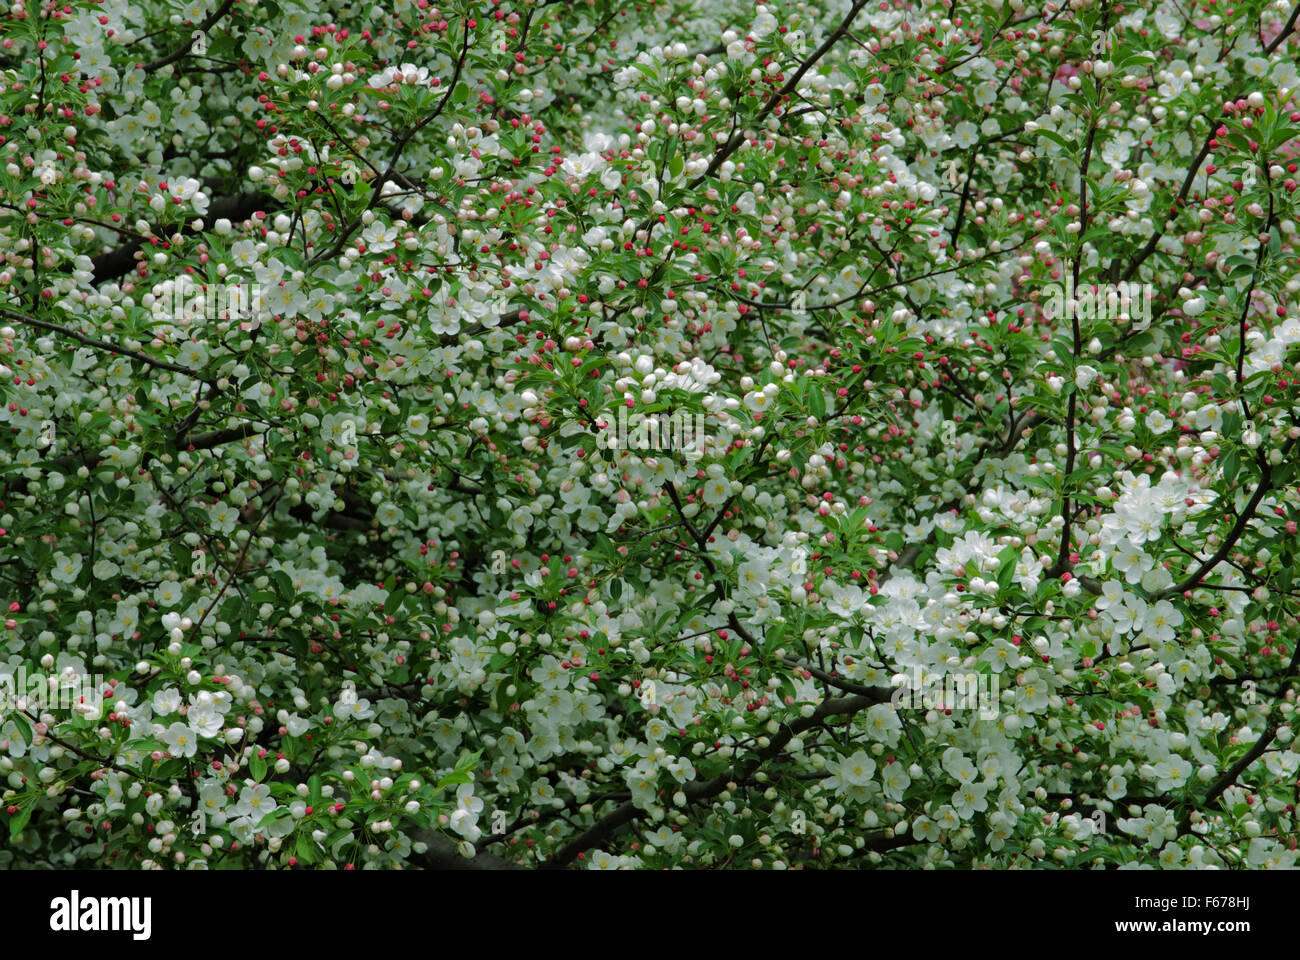 Malus  '   snowdrift ' , photographed at  the Arie den Boer garden in Des Moines, Iowa. Stock Photo